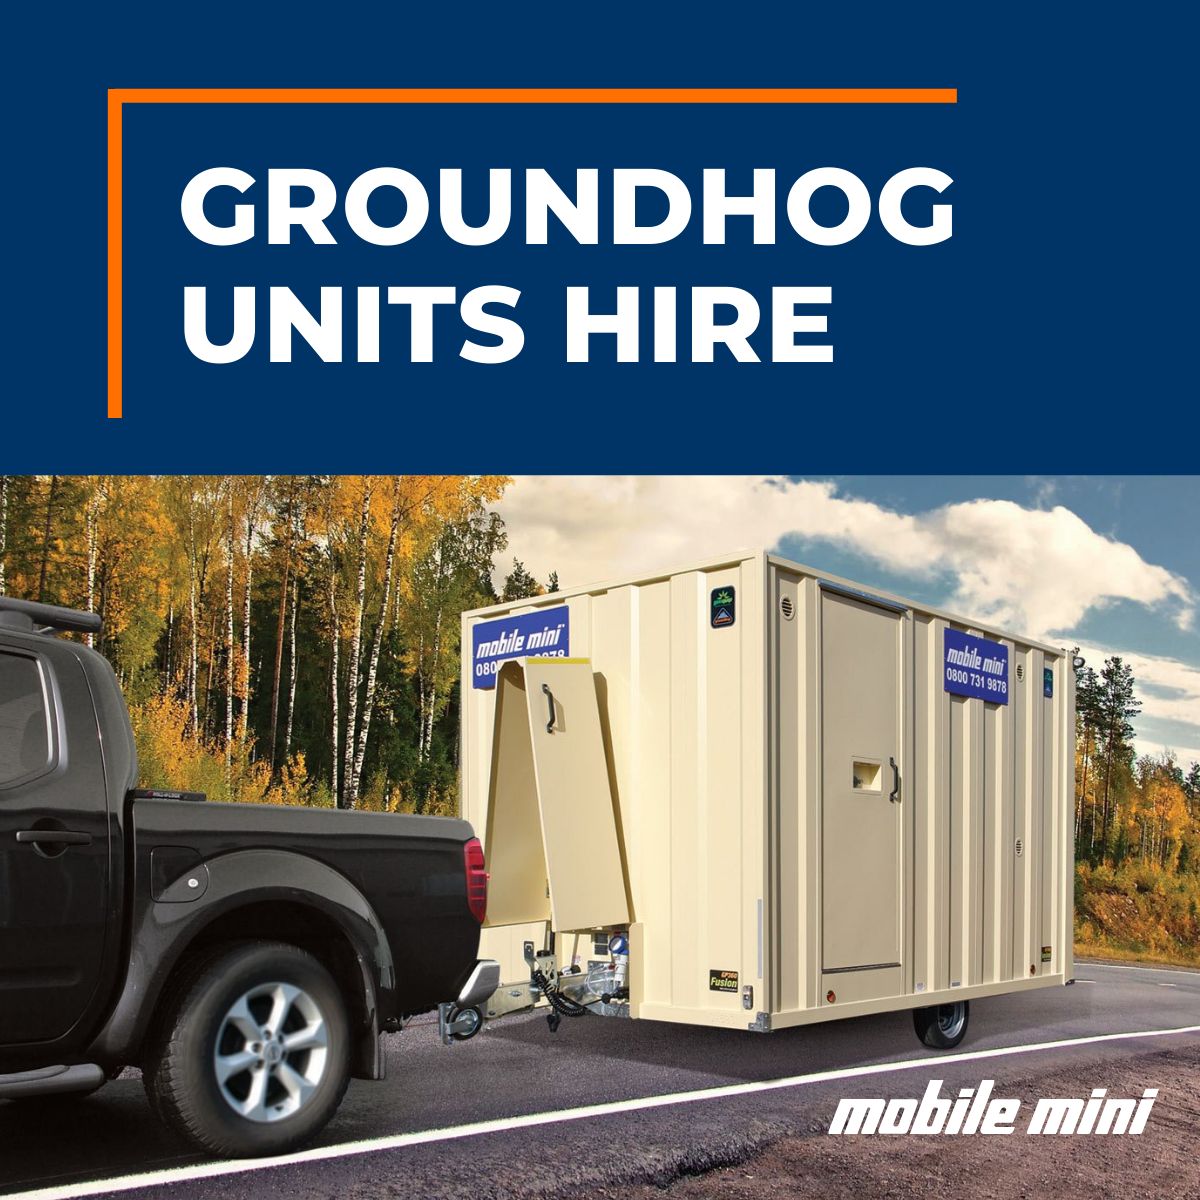 A mobile working environment that is comfortable, efficient and can be deployed in 3 minutes!

Our eco-friendly units are completely self-contained and purpose-built for sites without water or electricity connections.

#MobileMiniUK #GroundhogUnits #PortableAccommodation